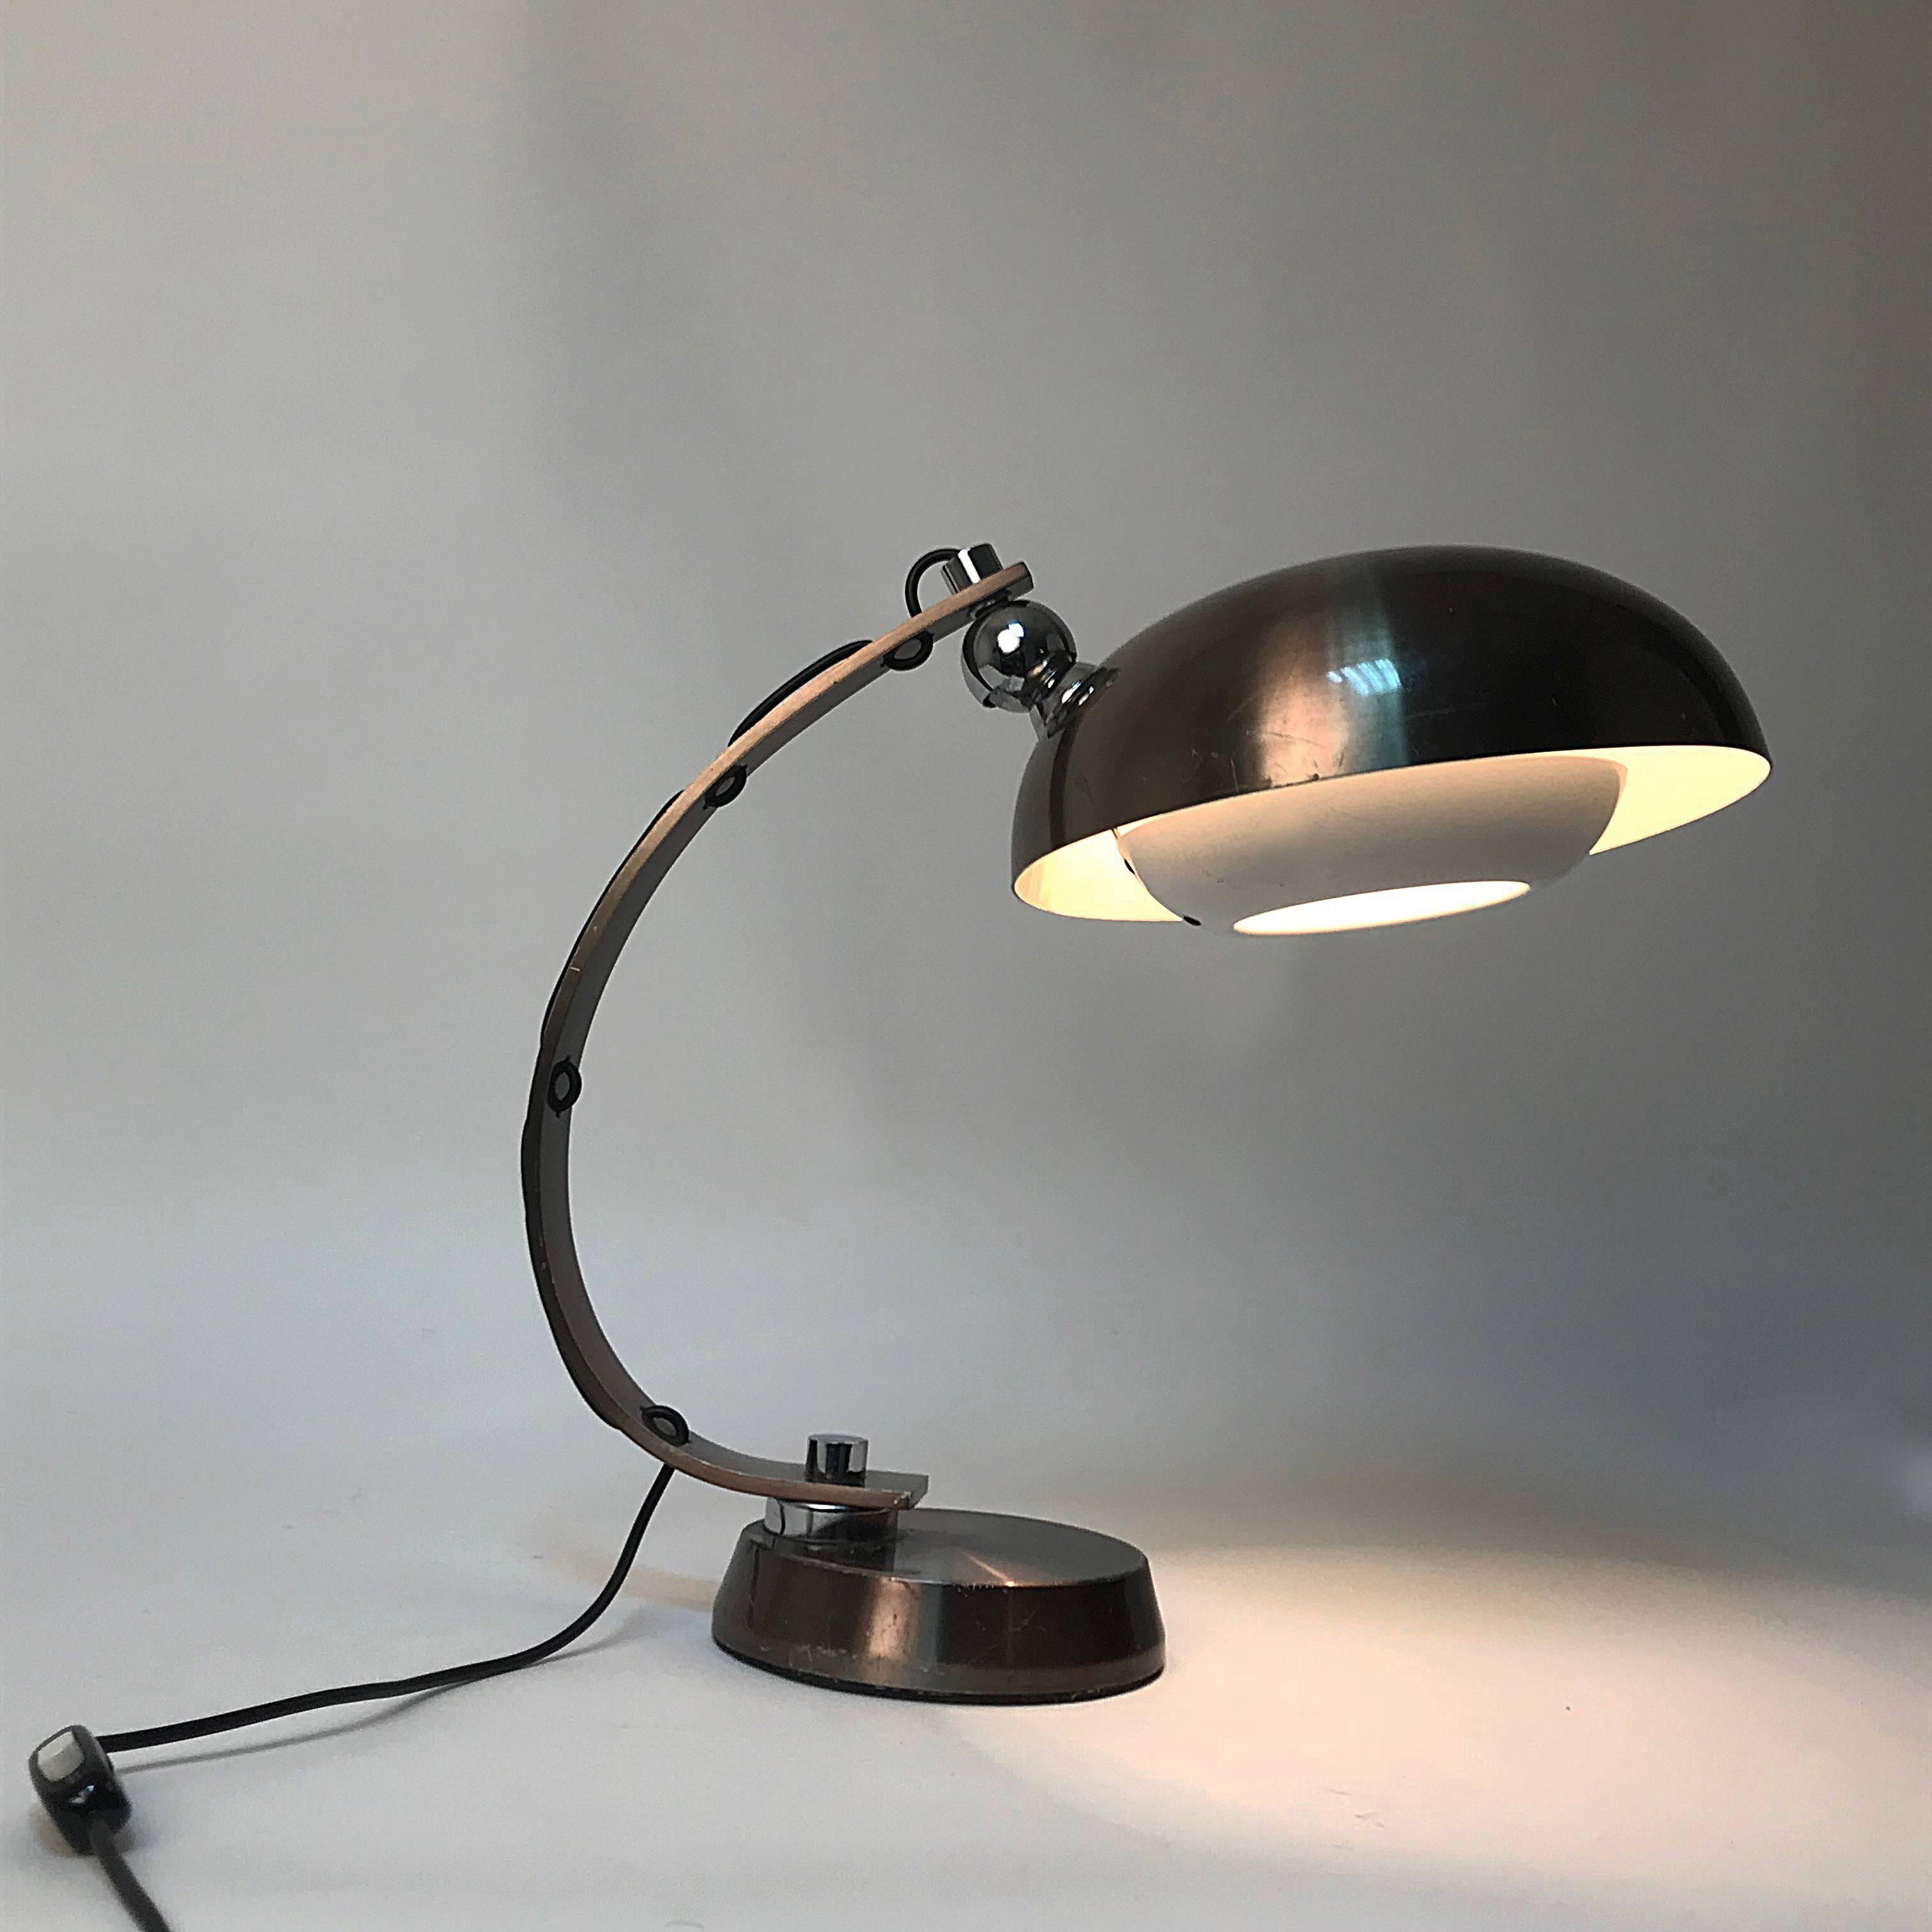 Brushed and Bronzed Aluminum Italian Table Lamp, 1970s Attributed to Arredoluce For Sale 2